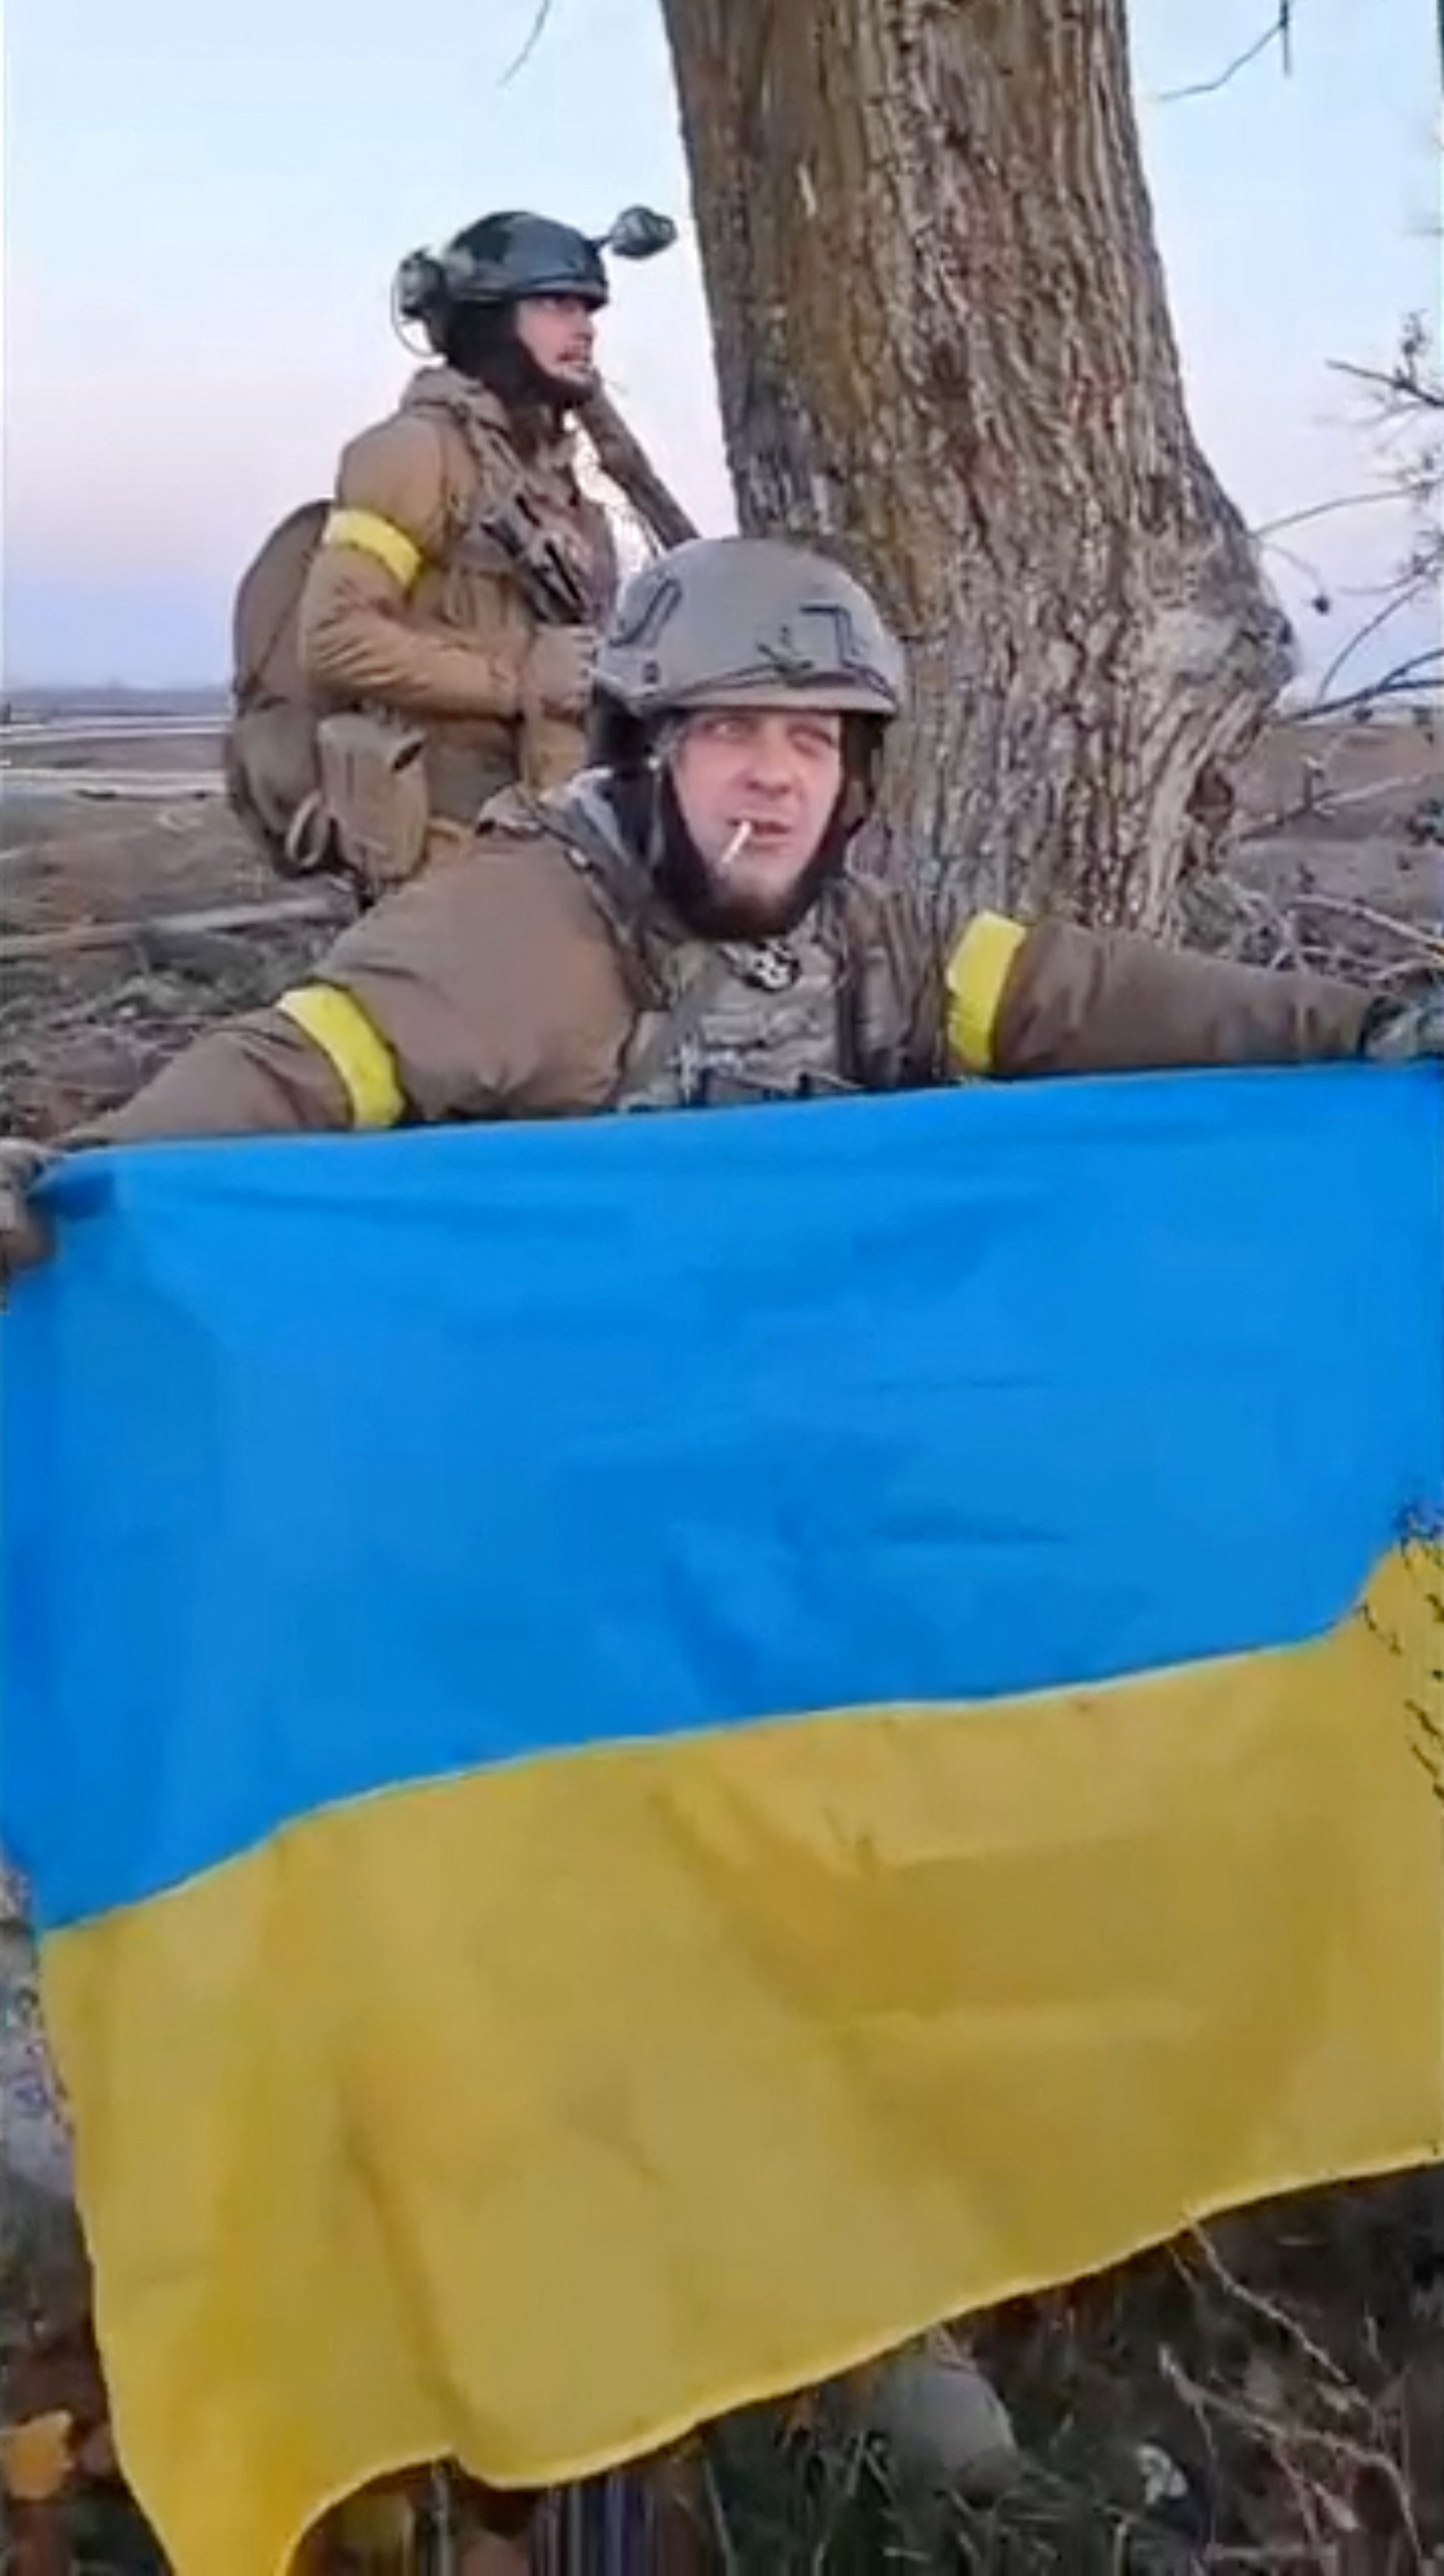 Russian flag comes down in Kherson, but Ukraine sees a trap